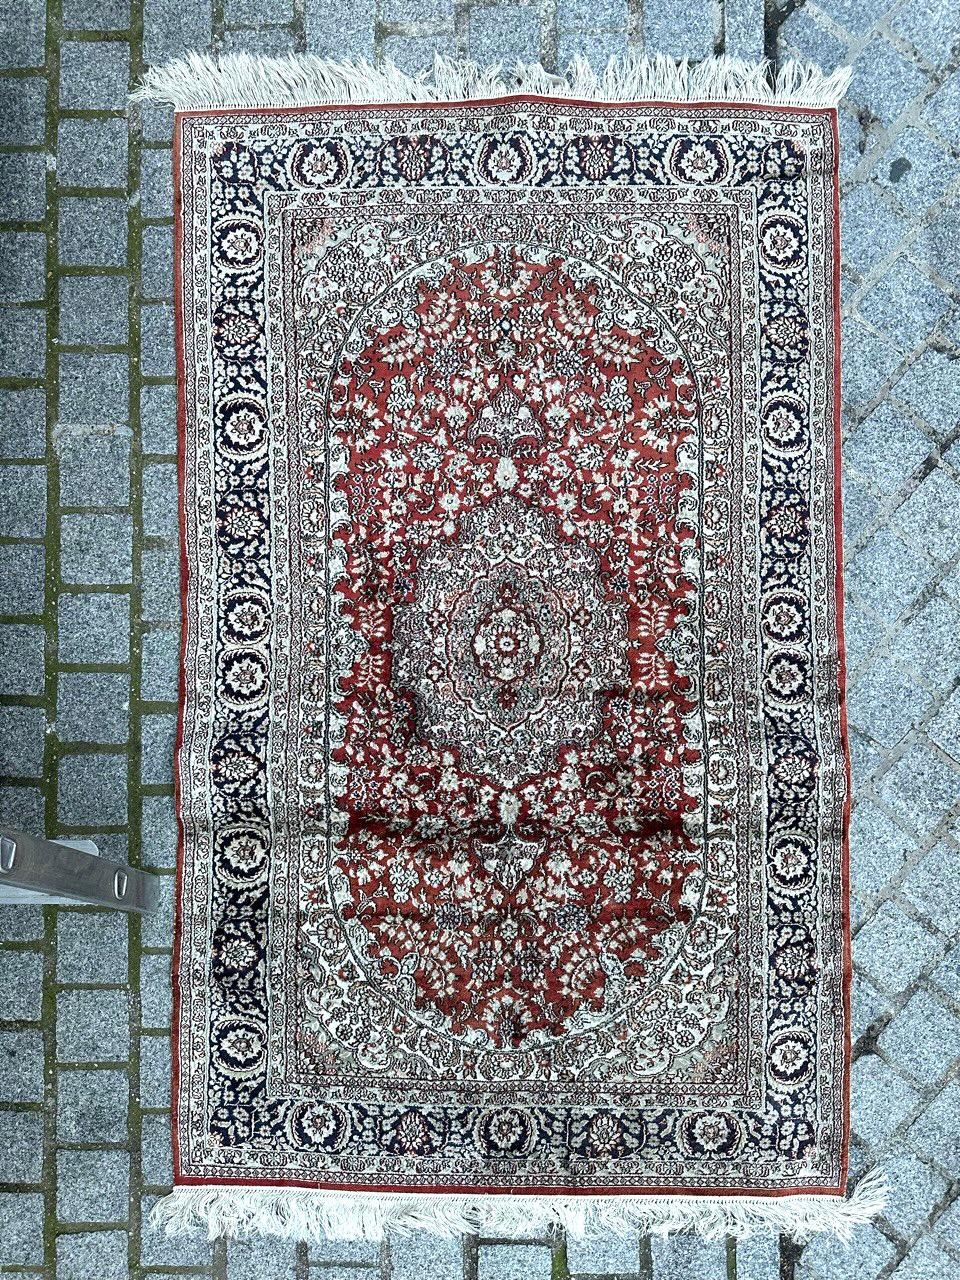 Exquisite vintage Persian Tabriz-style rug, meticulously hand-knotted with silk on silk, boasting a delicate floral design. In the center, a white and light green floral medallion is surrounded by deep blue lines. The vibrant reddish-orange field is